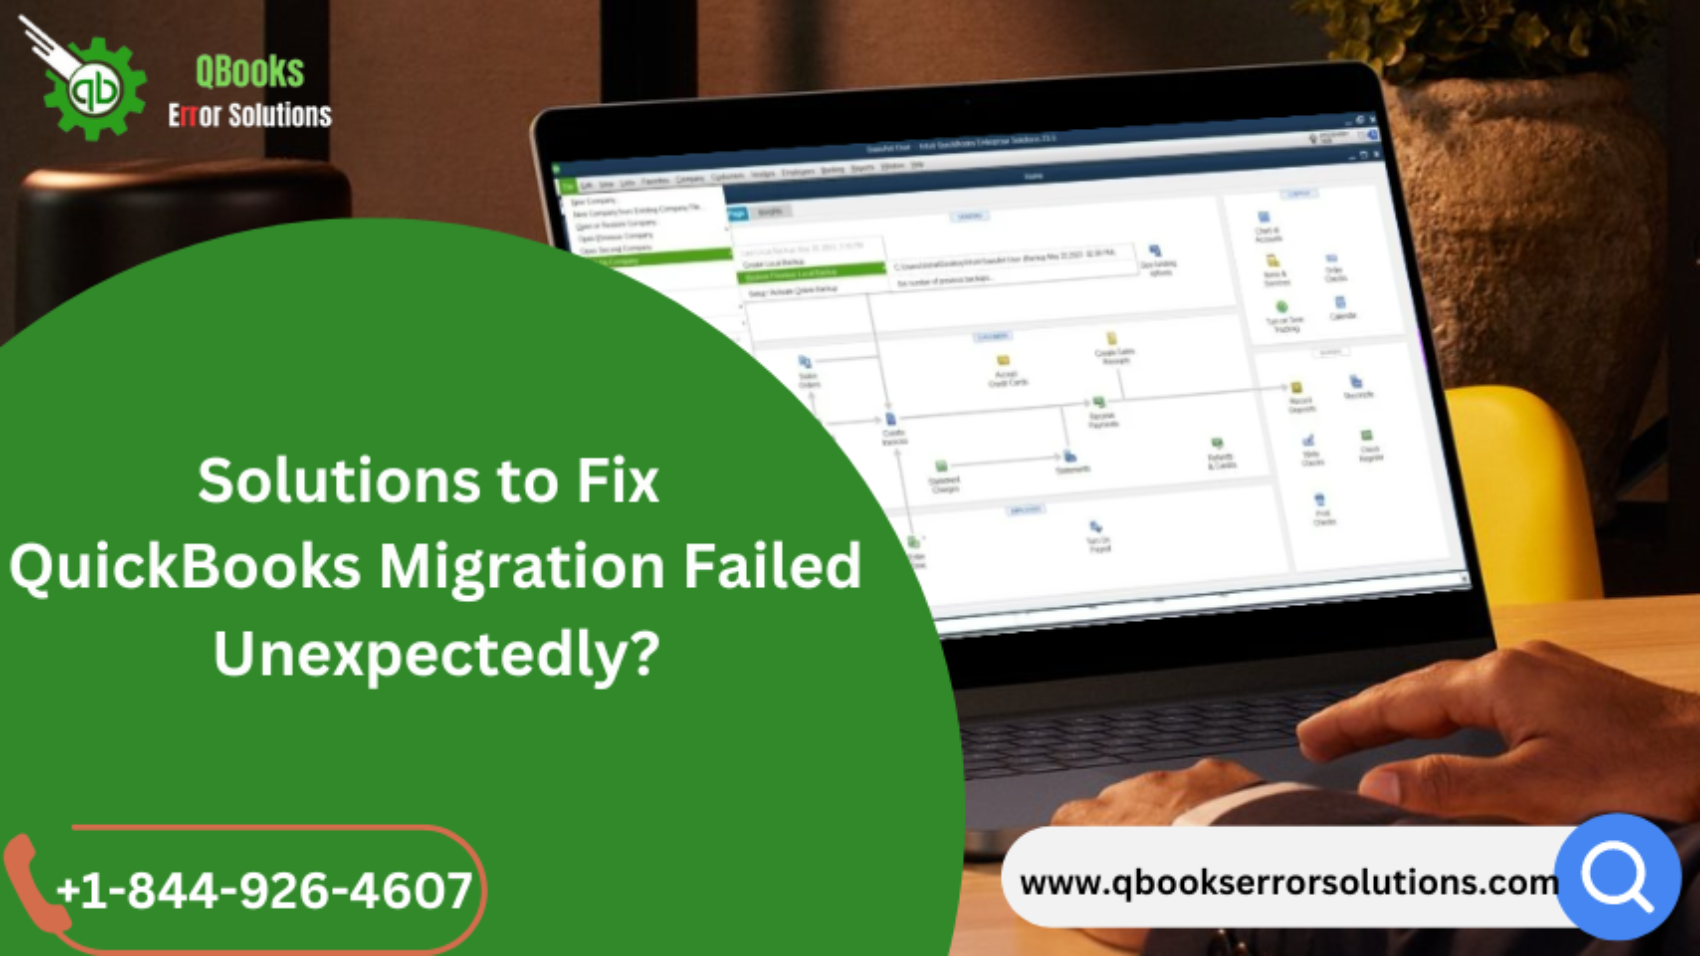 How To Resolve QuickBooks Migration Failed Unexpectedly